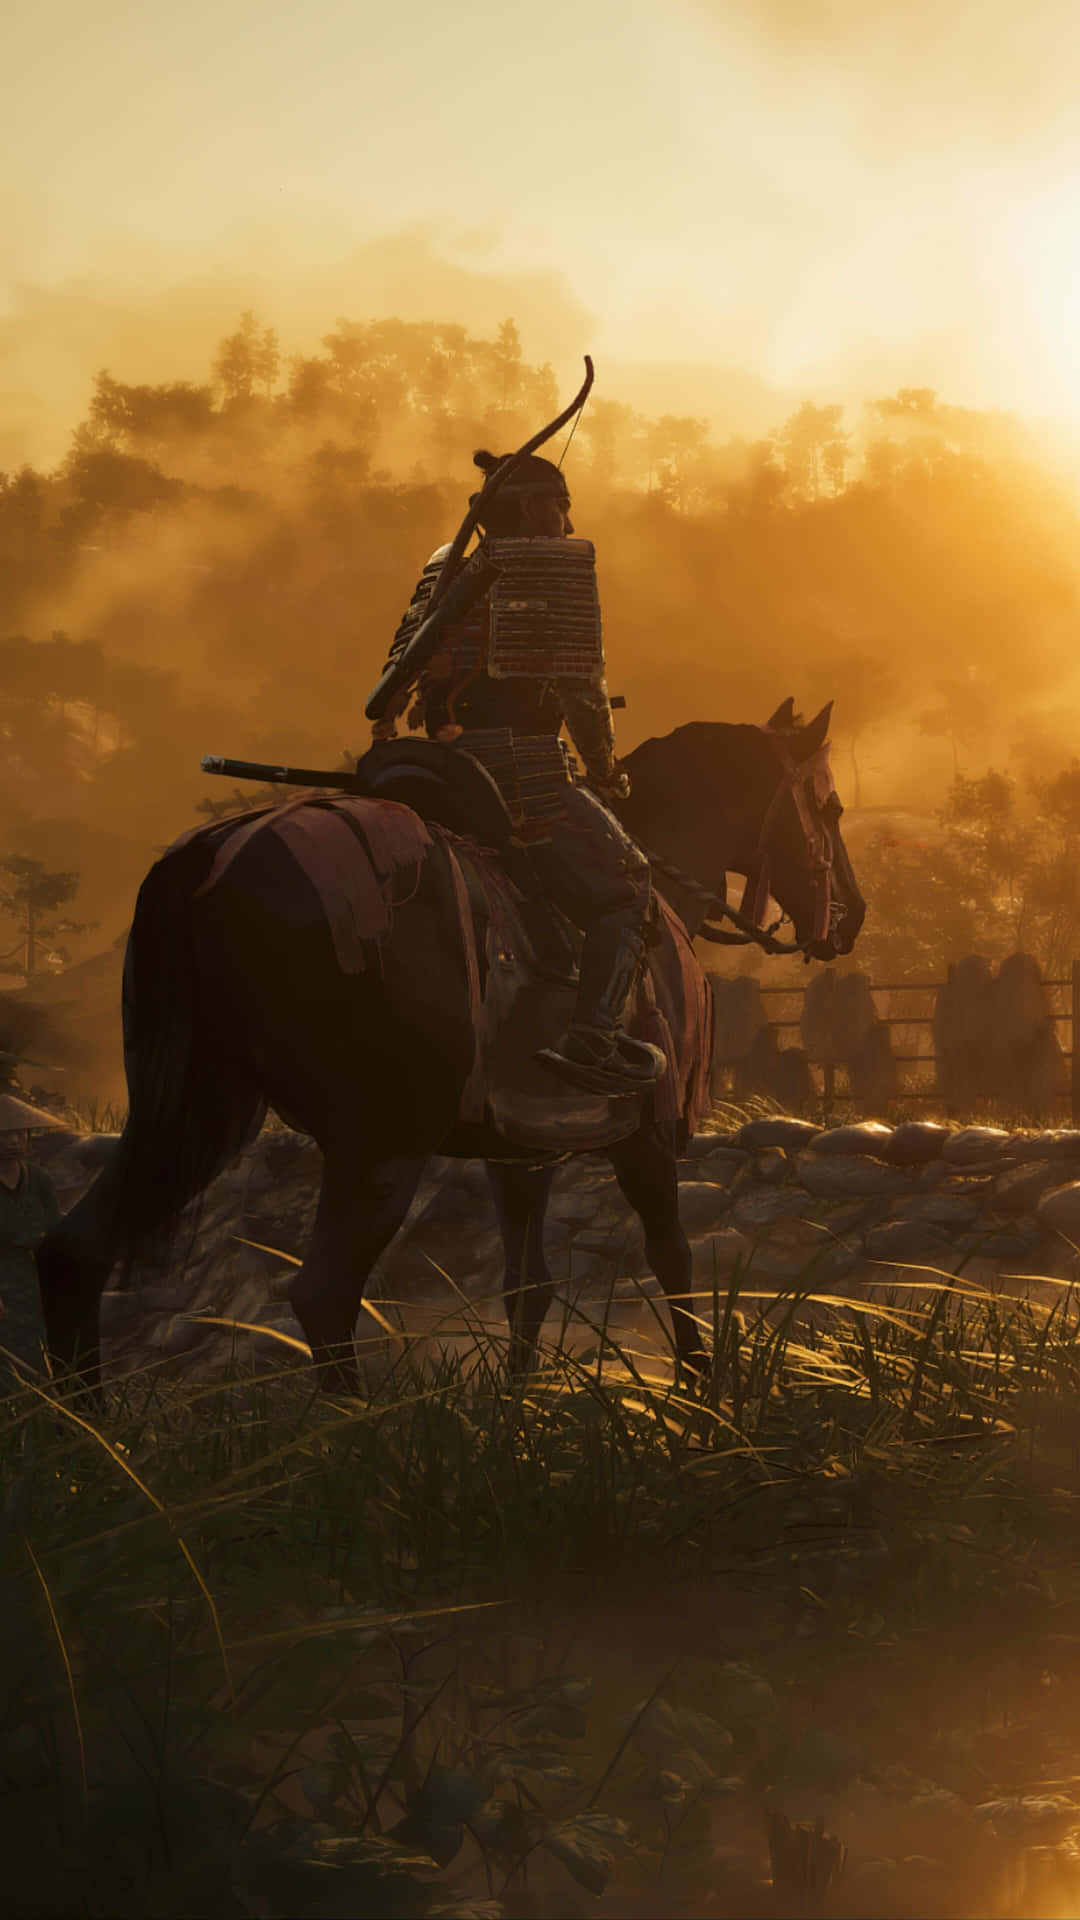 A Man Riding A Horse In The Sunset Wallpaper